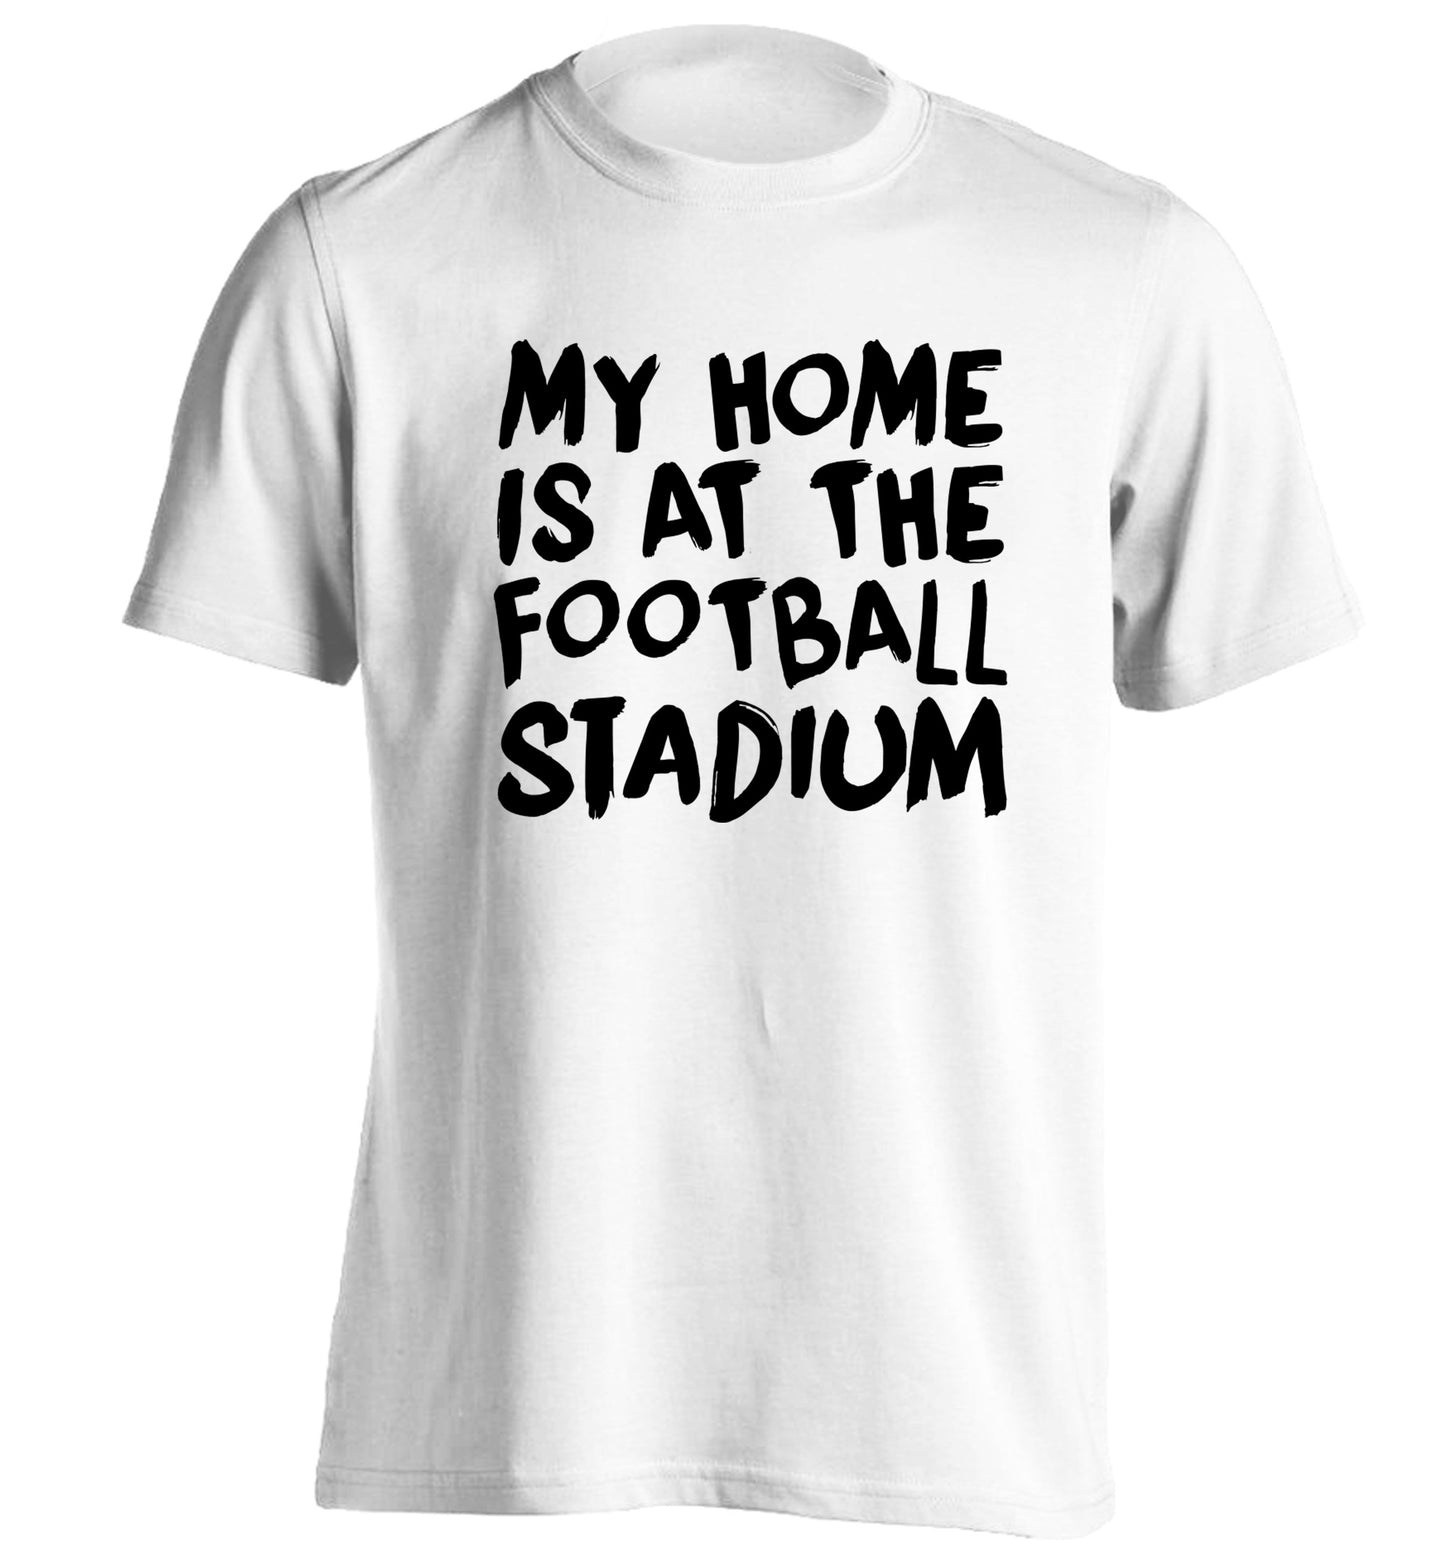 My home is at the football stadium adults unisex white Tshirt 2XL